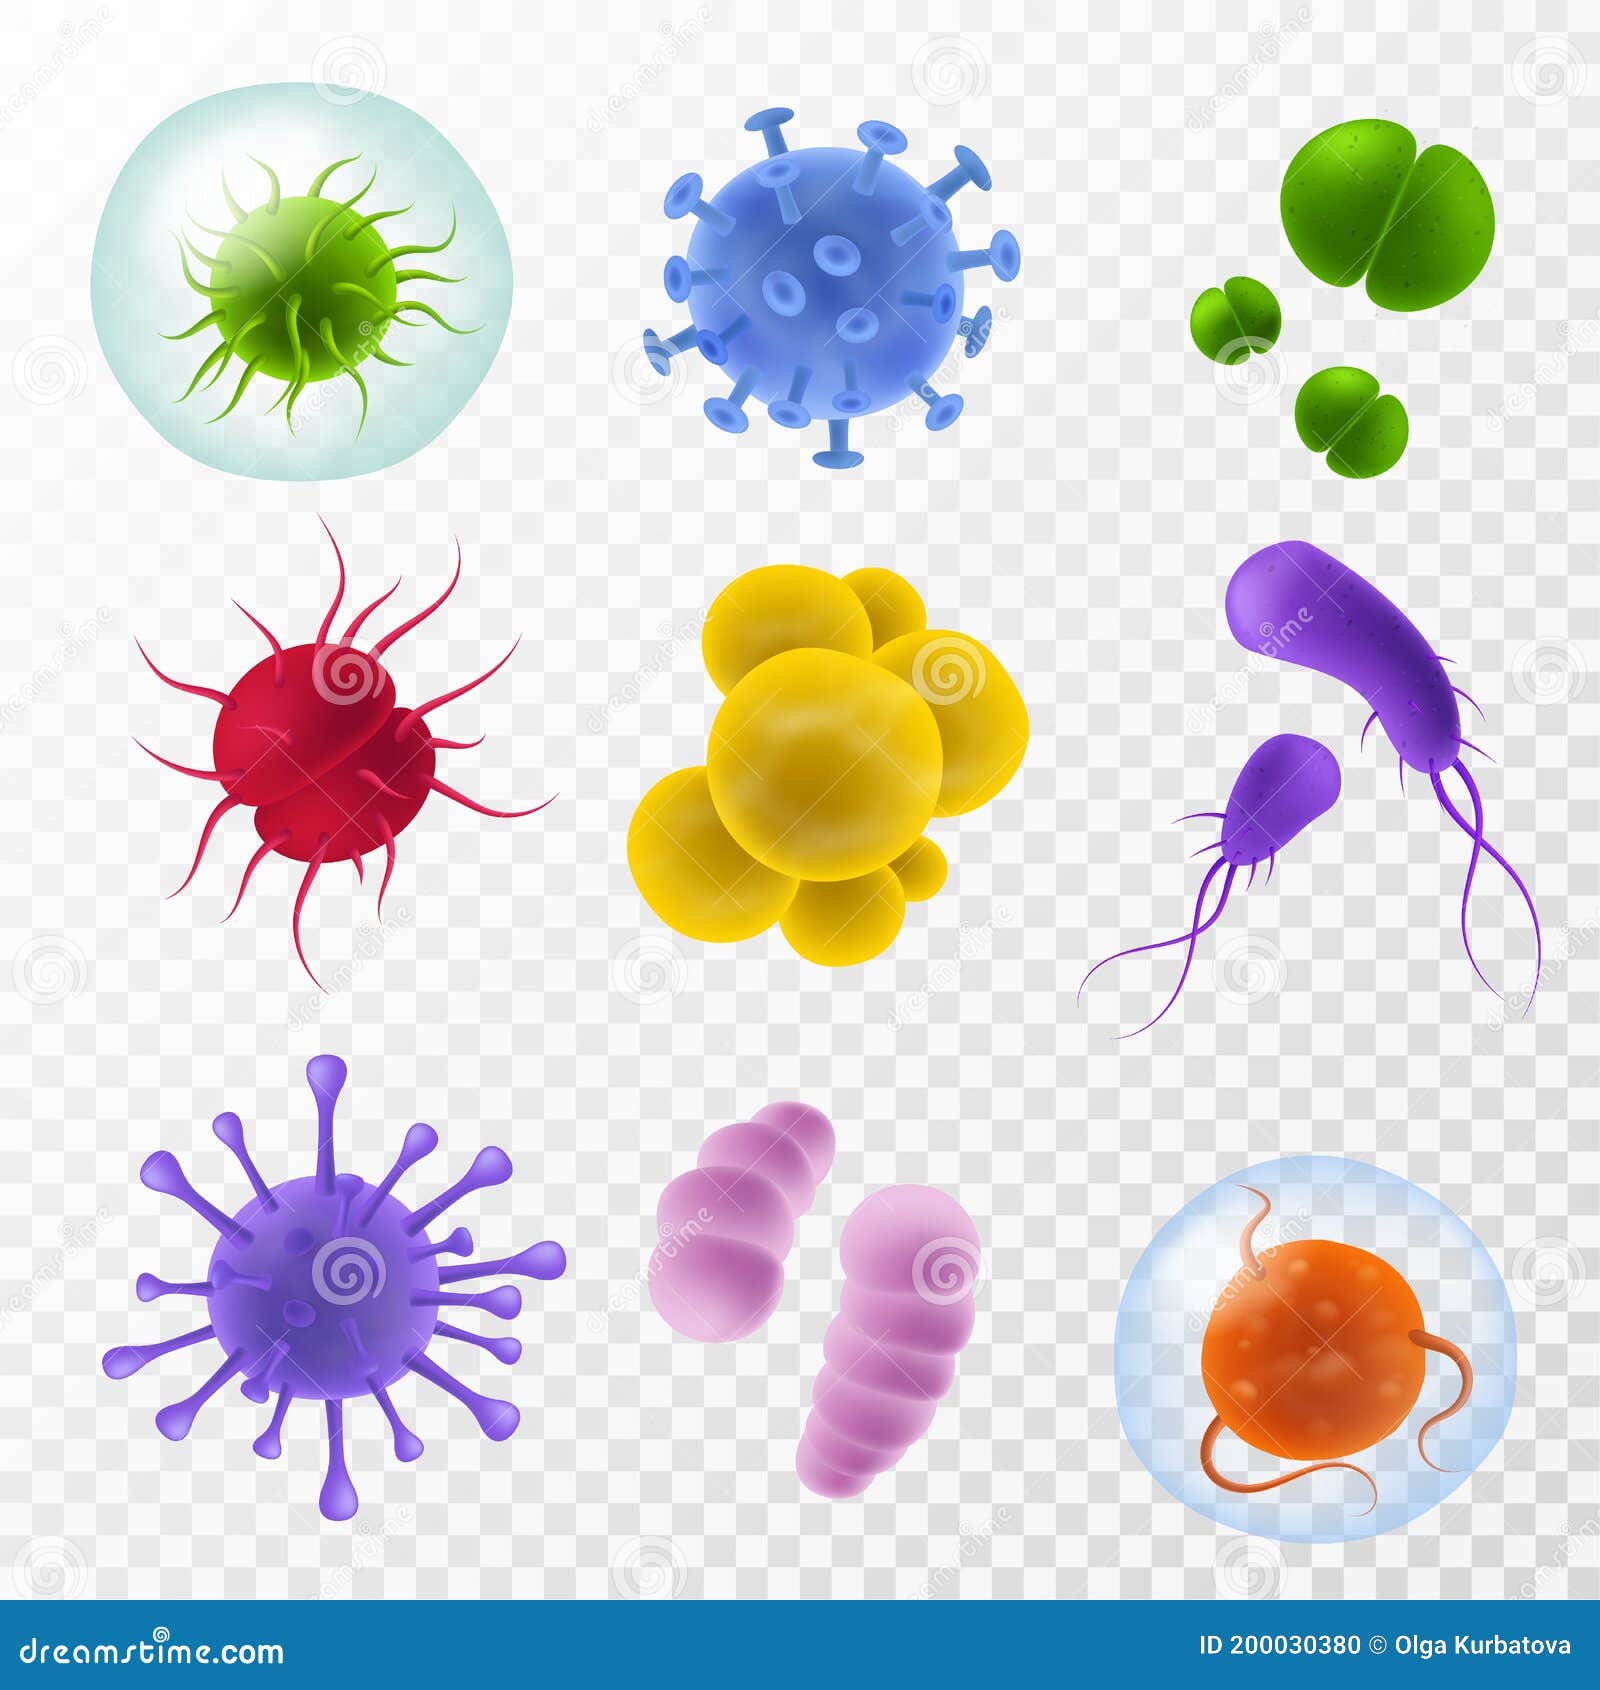 realistic germs. microscopic bacillus and infection cells, colorful bacteria and microorganism icon, covid flu viruses